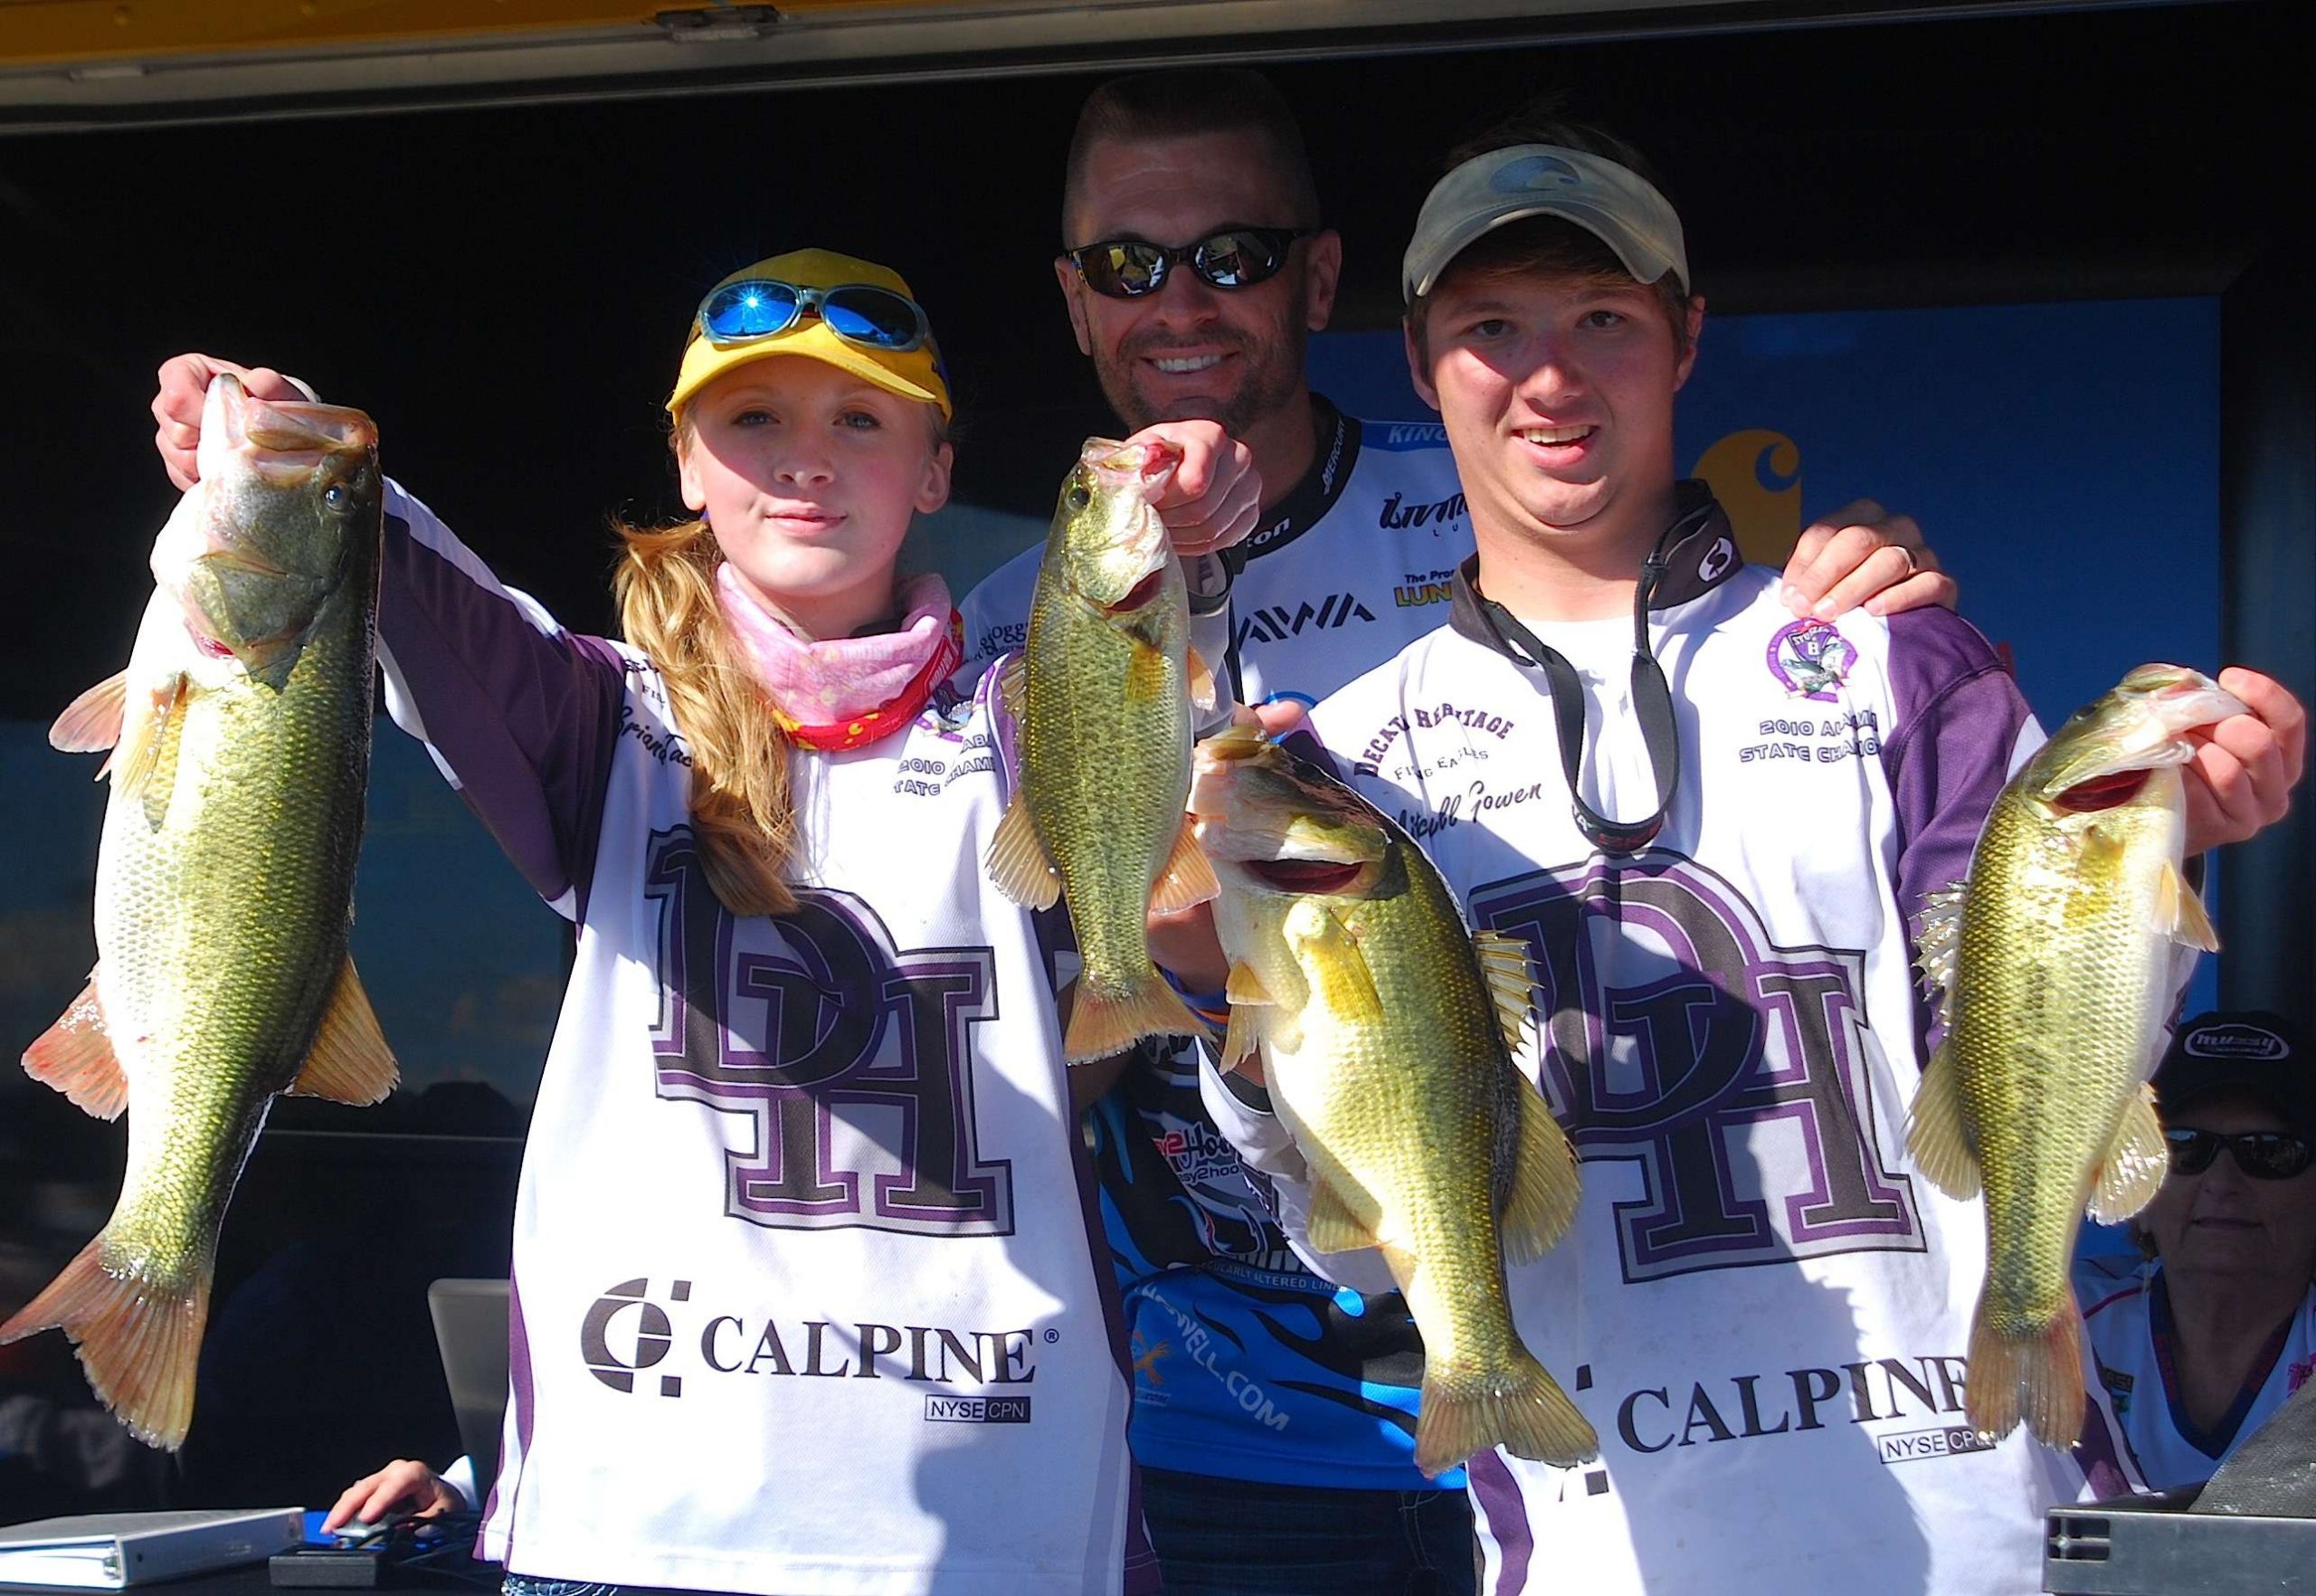 Briana Tucker and Mitchell Gowen of Decatur Heritage won the B.A.S.S. High School Invitational over the summer, and had a strong showing of 3rd place with 13.31.